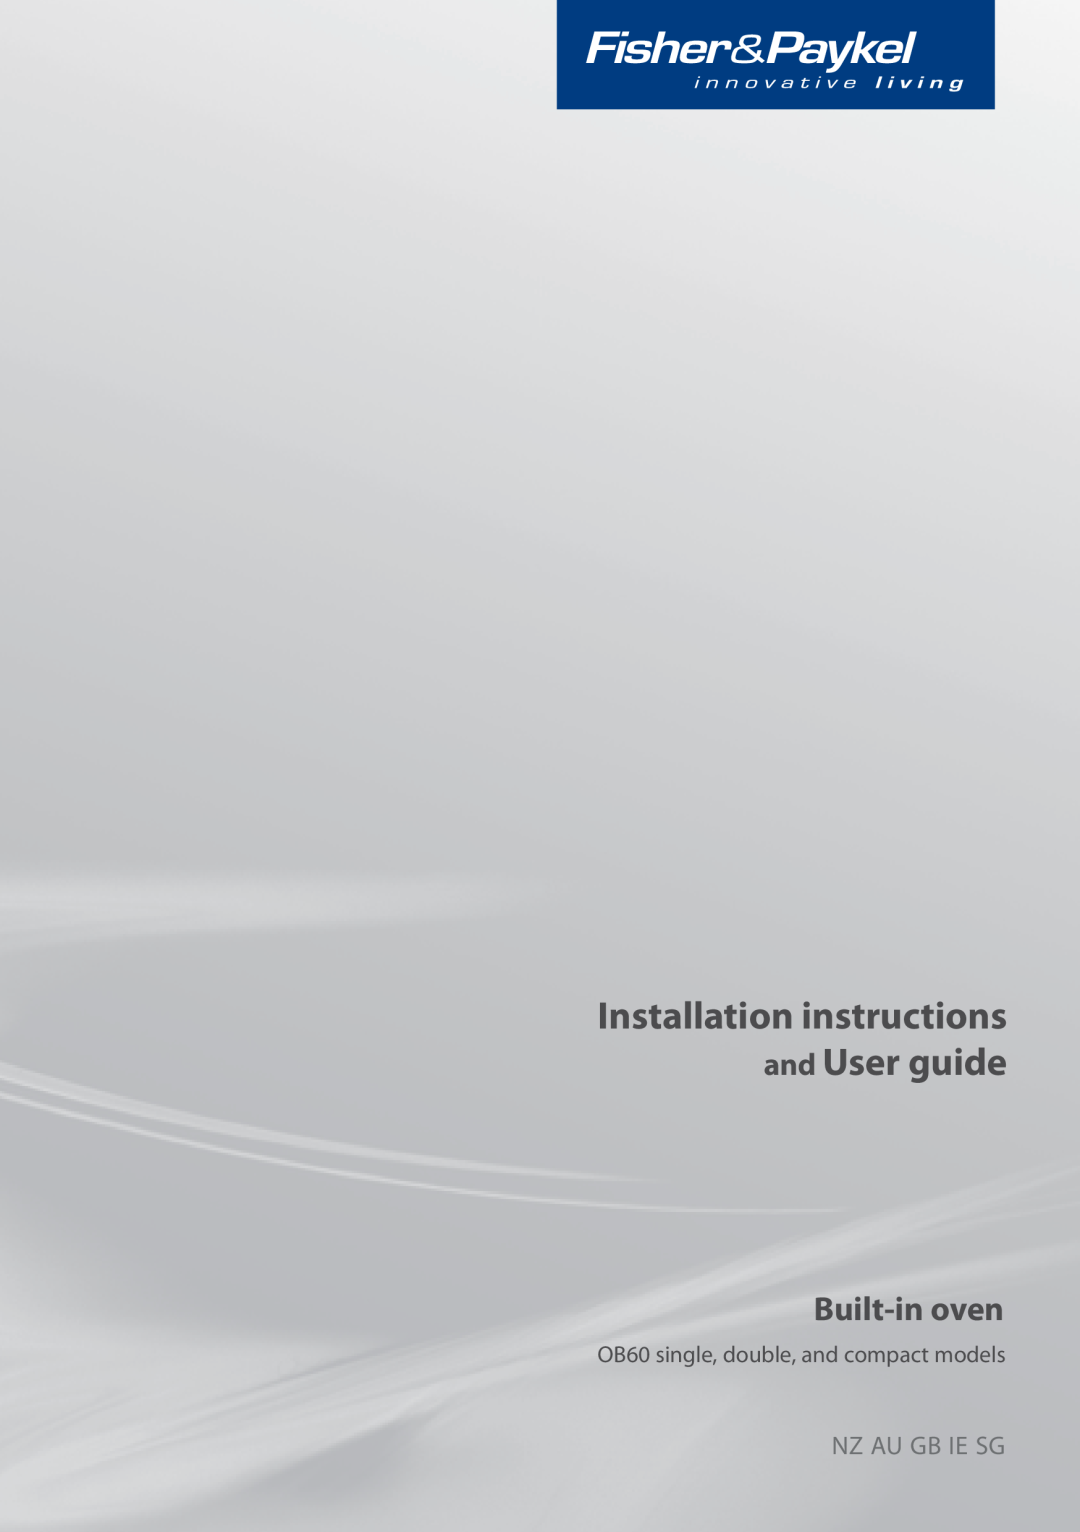 Fisher & Paykel OB60 installation instructions Installation instructions and User guide, Built-in oven, Nz Au Gb Ie 